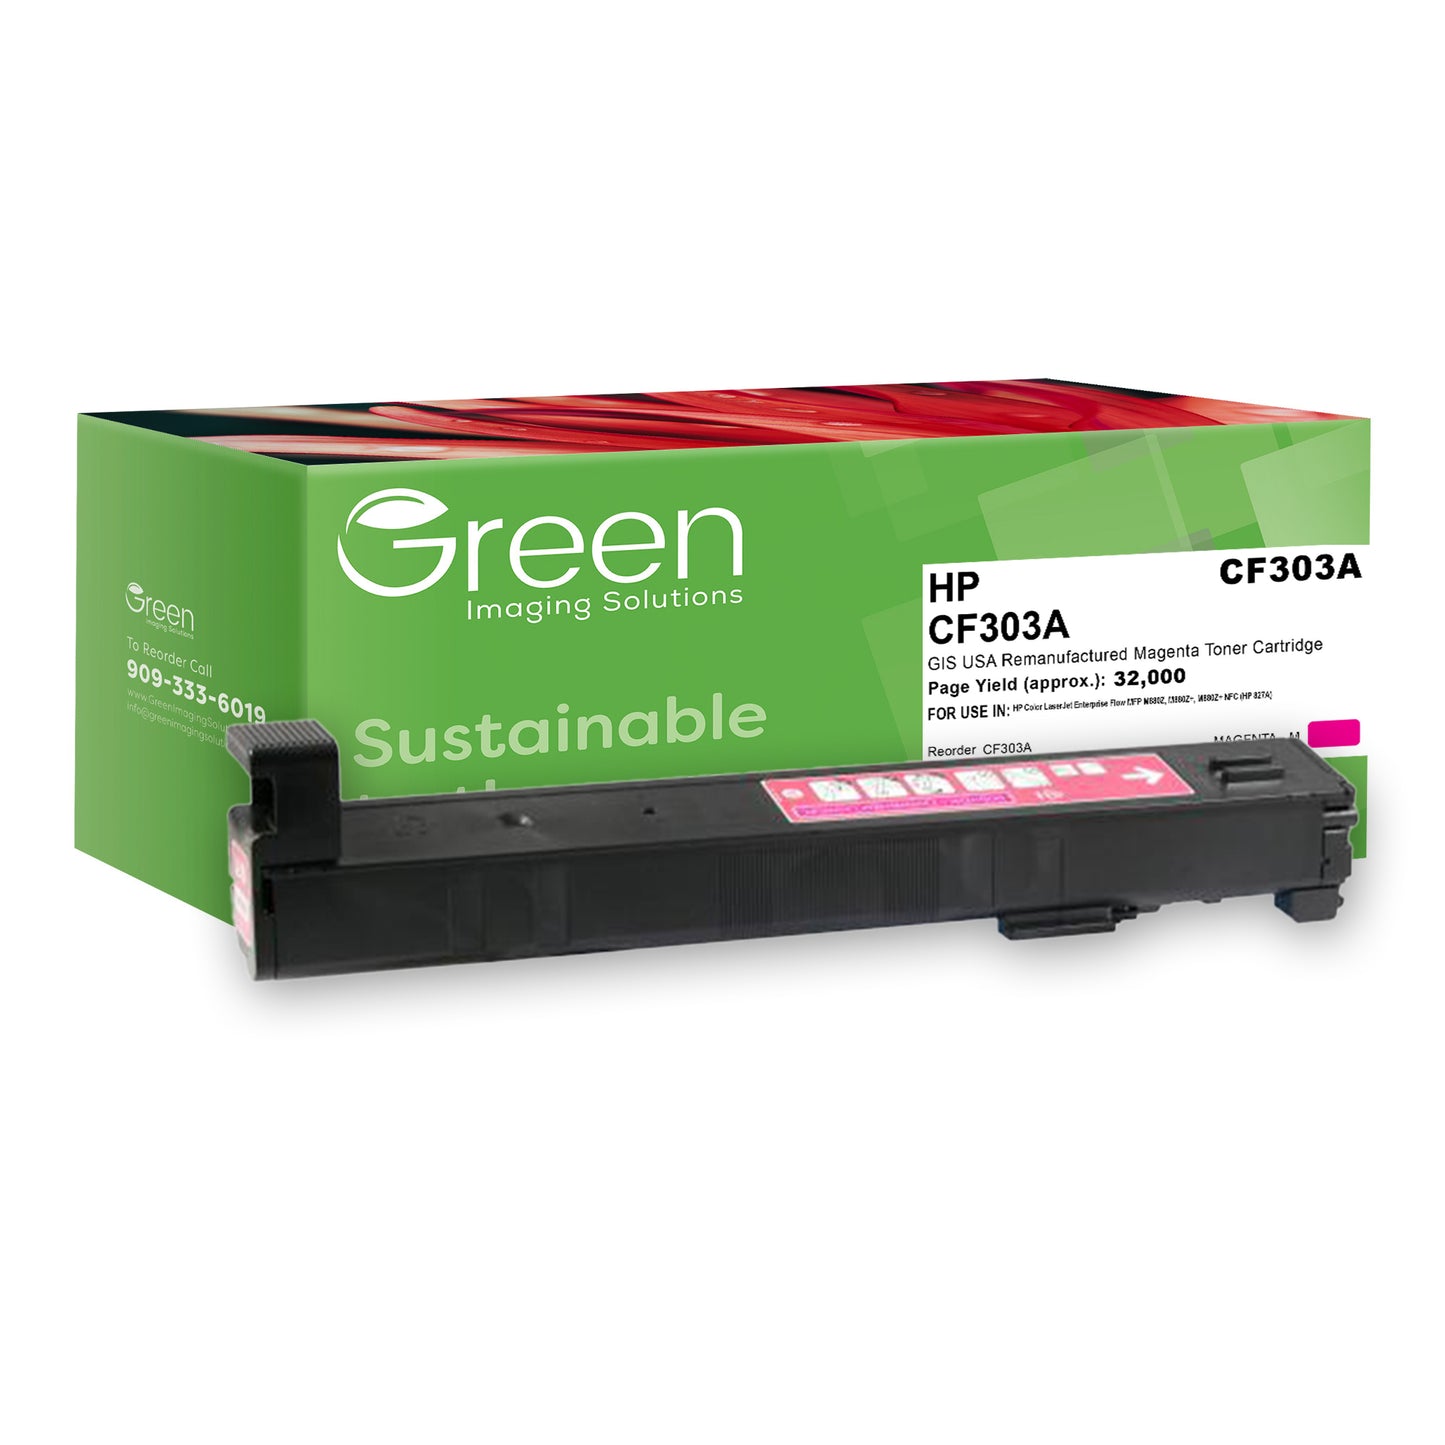 Green Imaging Solutions USA Remanufactured Magenta Toner Cartridge for HP 827A (CF303A)